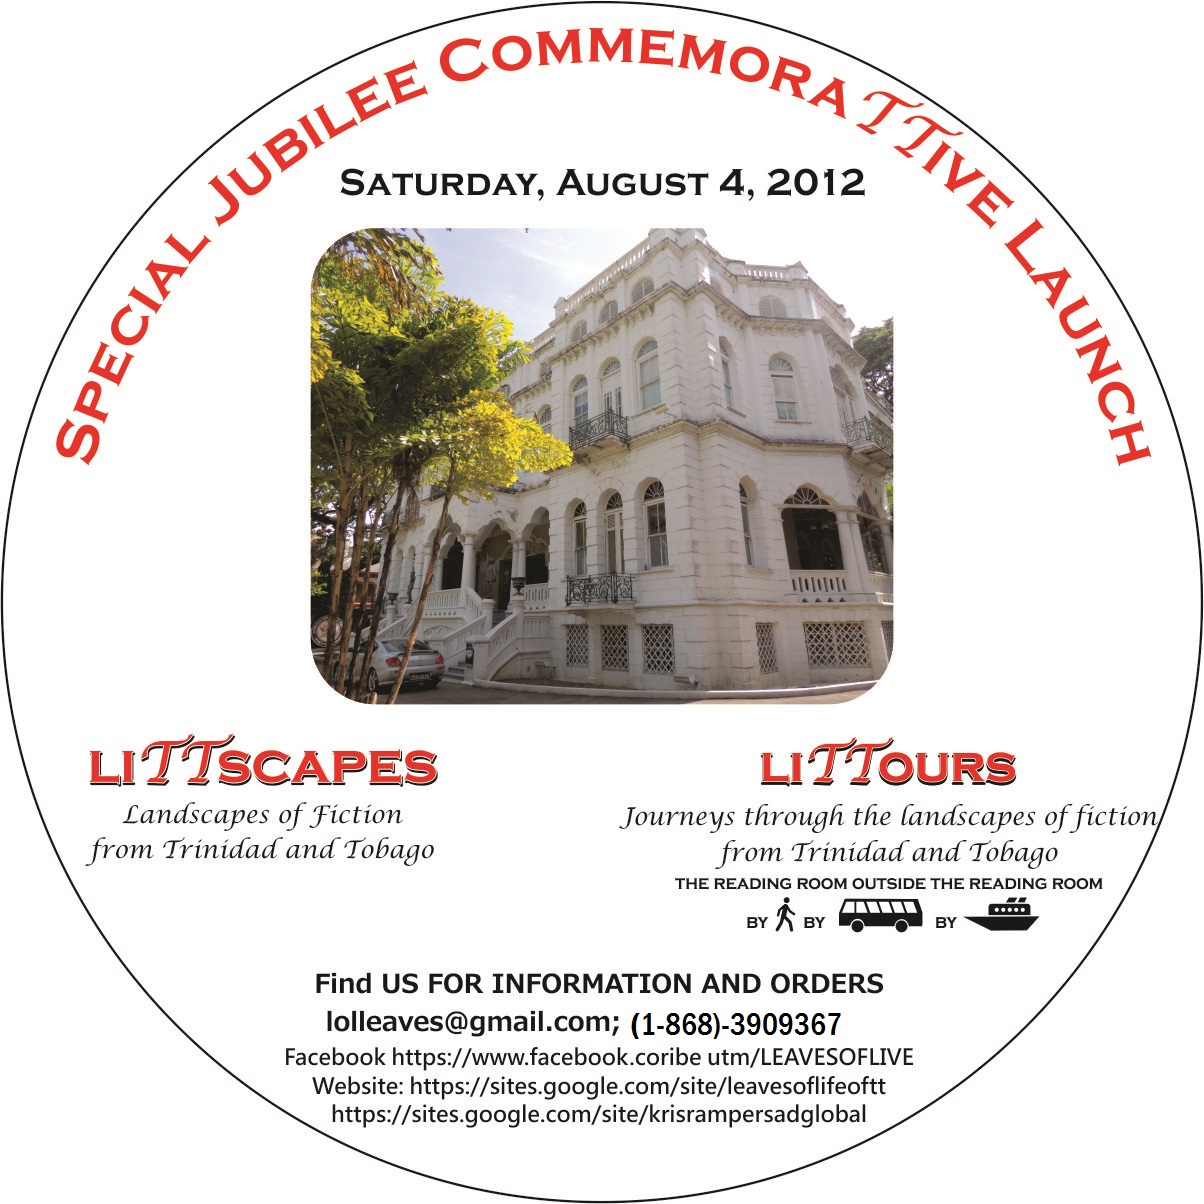 Special commemorative Jubilee of Independence launch at White Hall of LiTTscapes - Landscapes of Fiction from Trinidad and Tobago by Dr Kris Rampersad